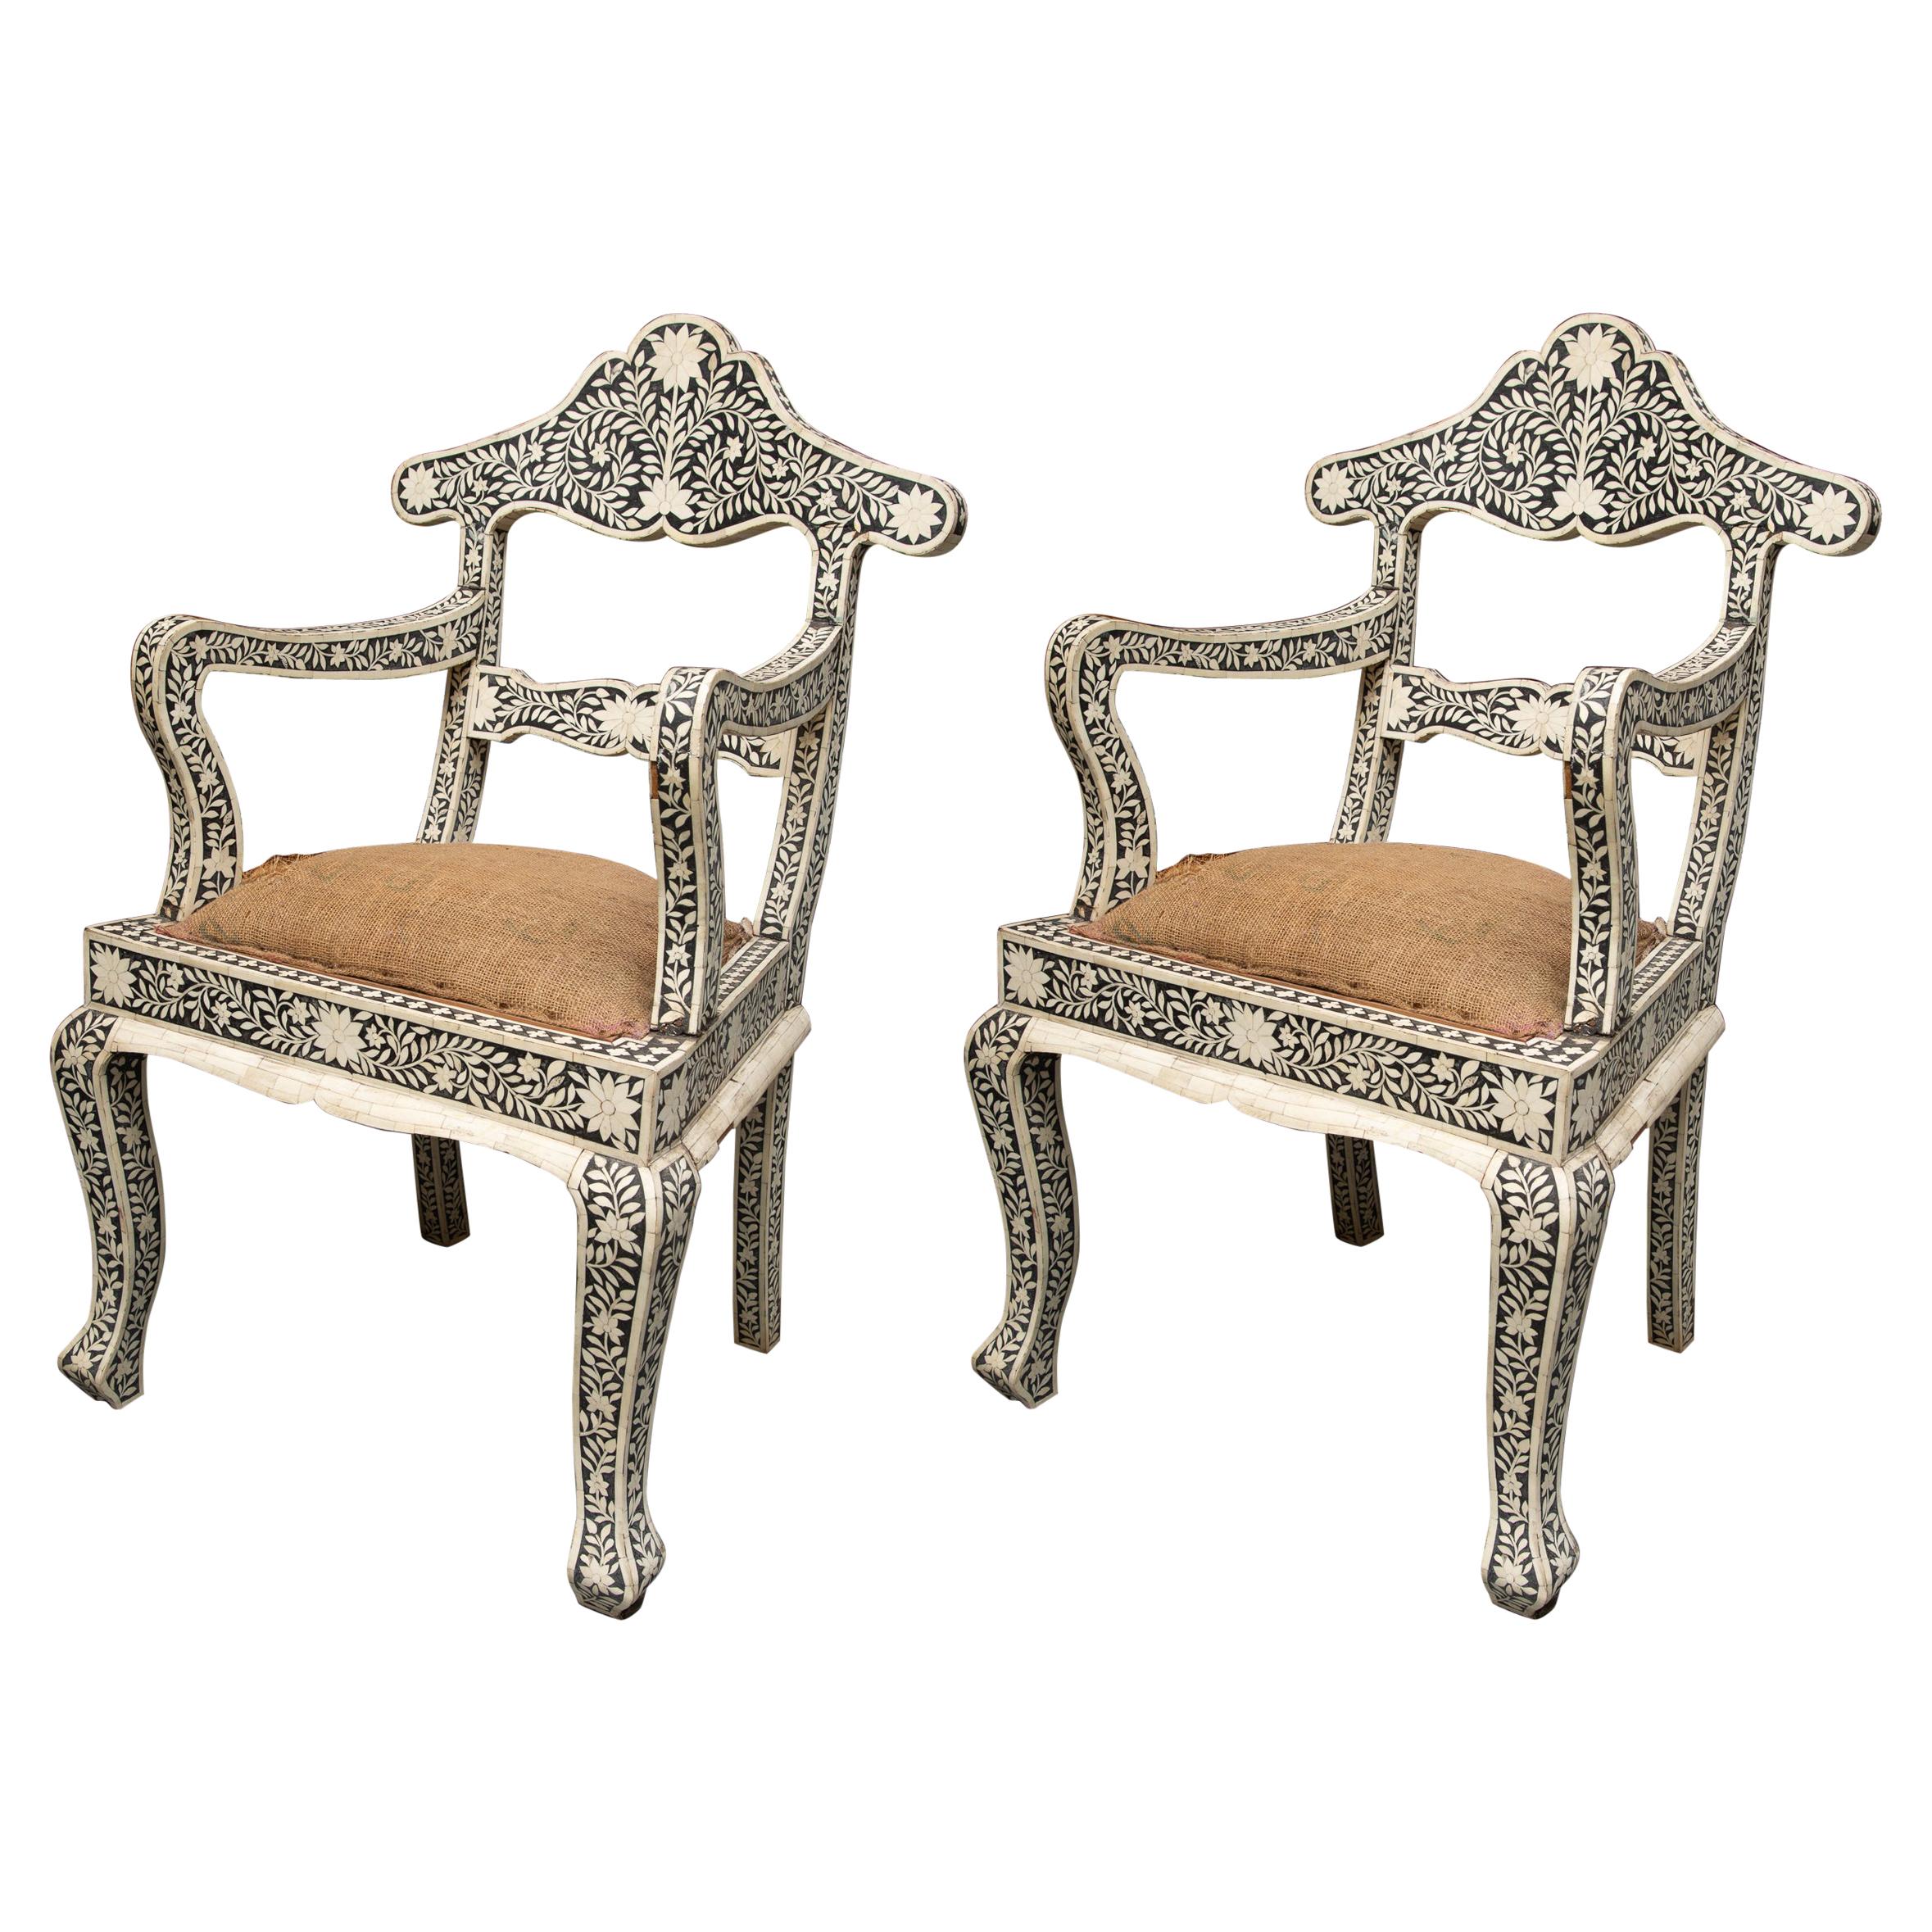 Pair of Ebony and Bone Inlaid Moroccan Armchairs